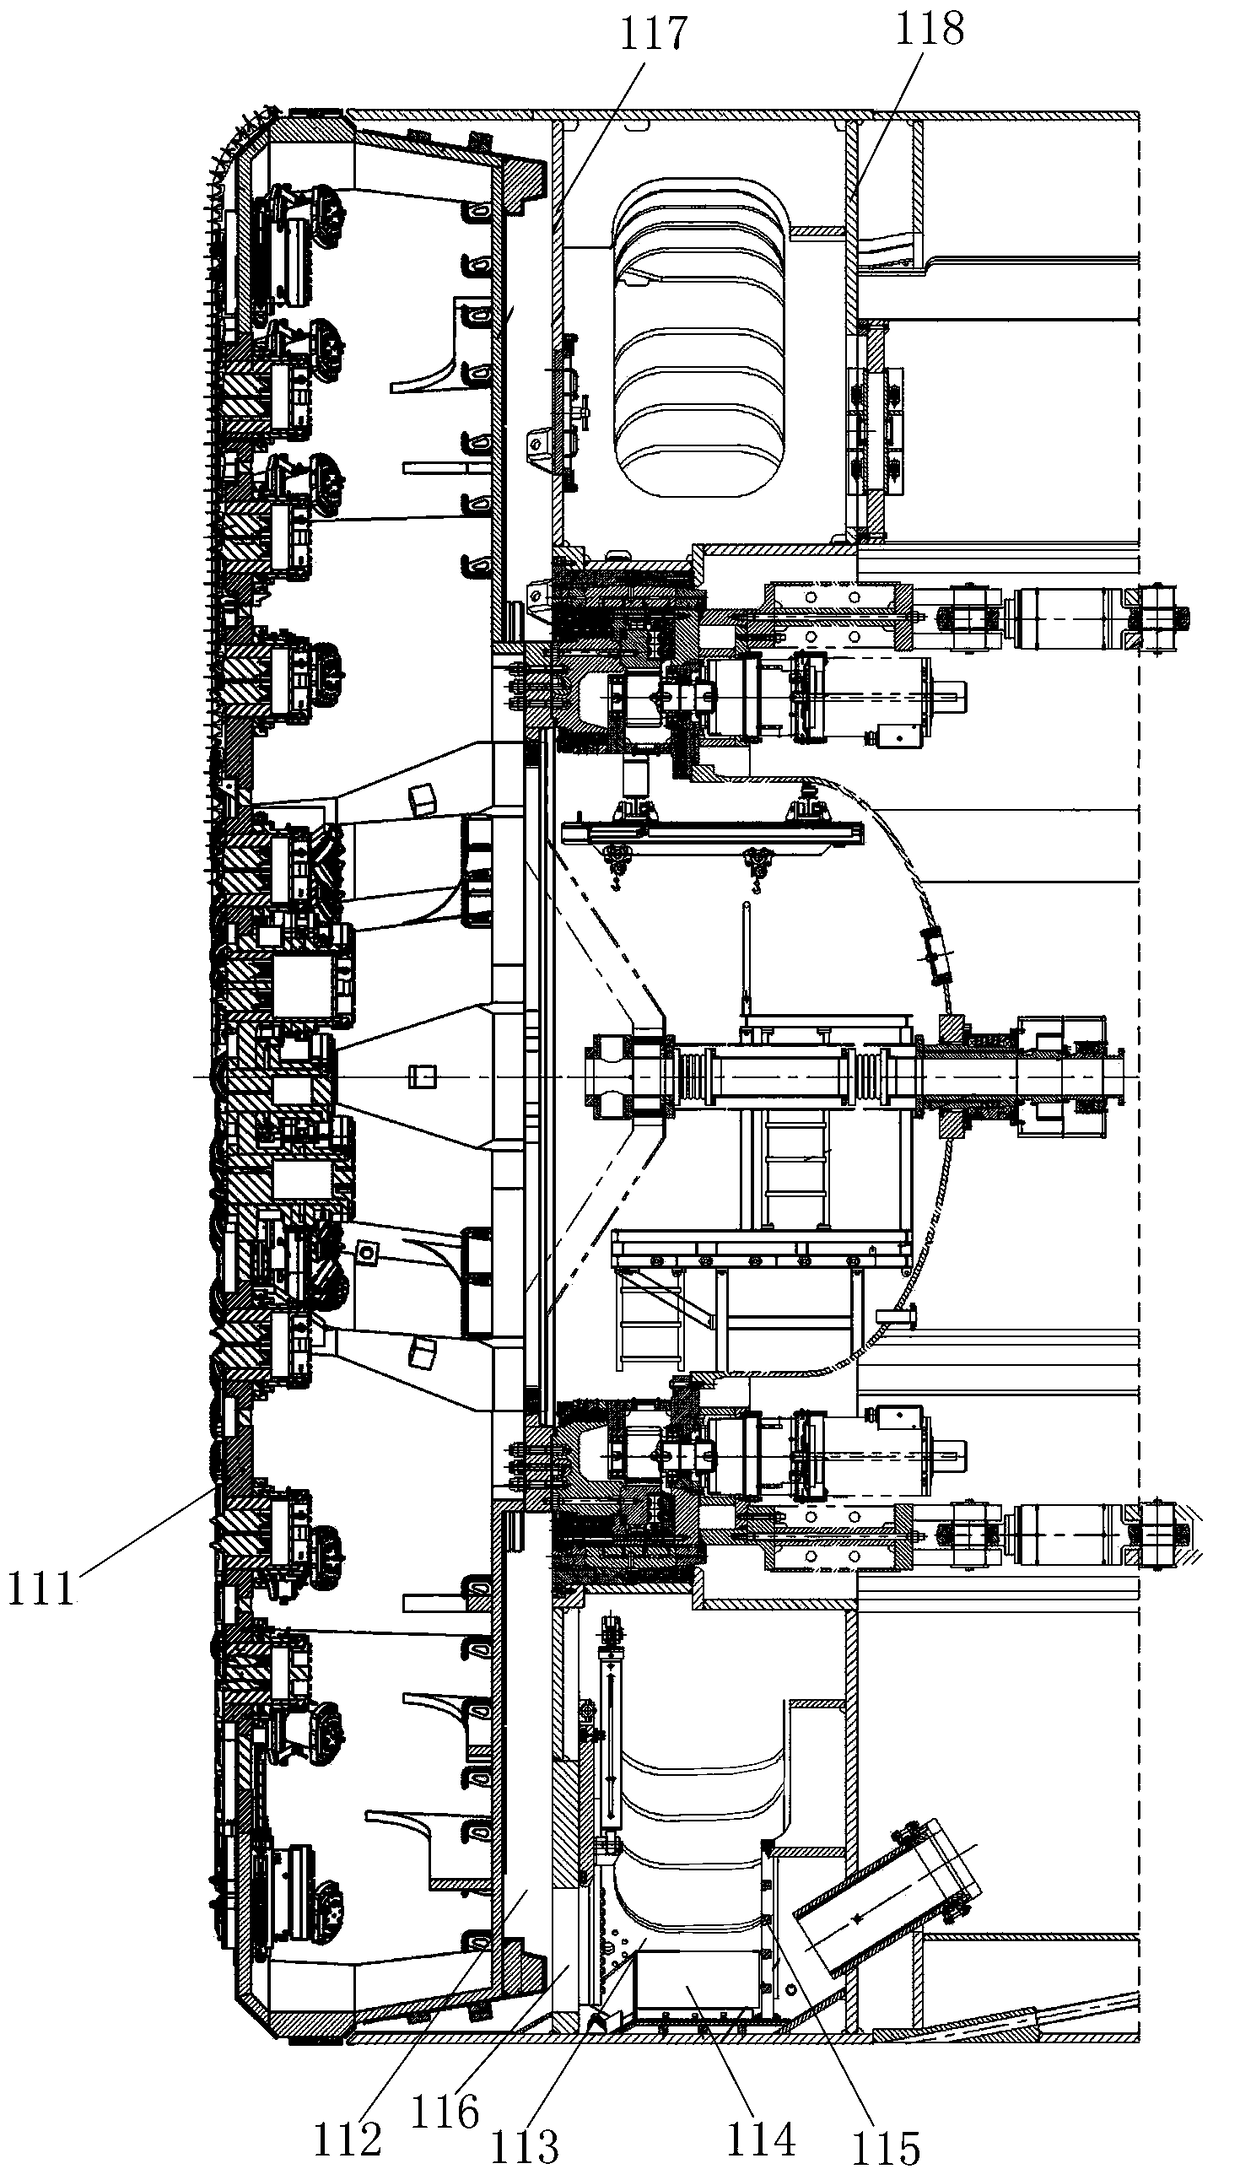 Muddy water circulating system for shield tunneling machine